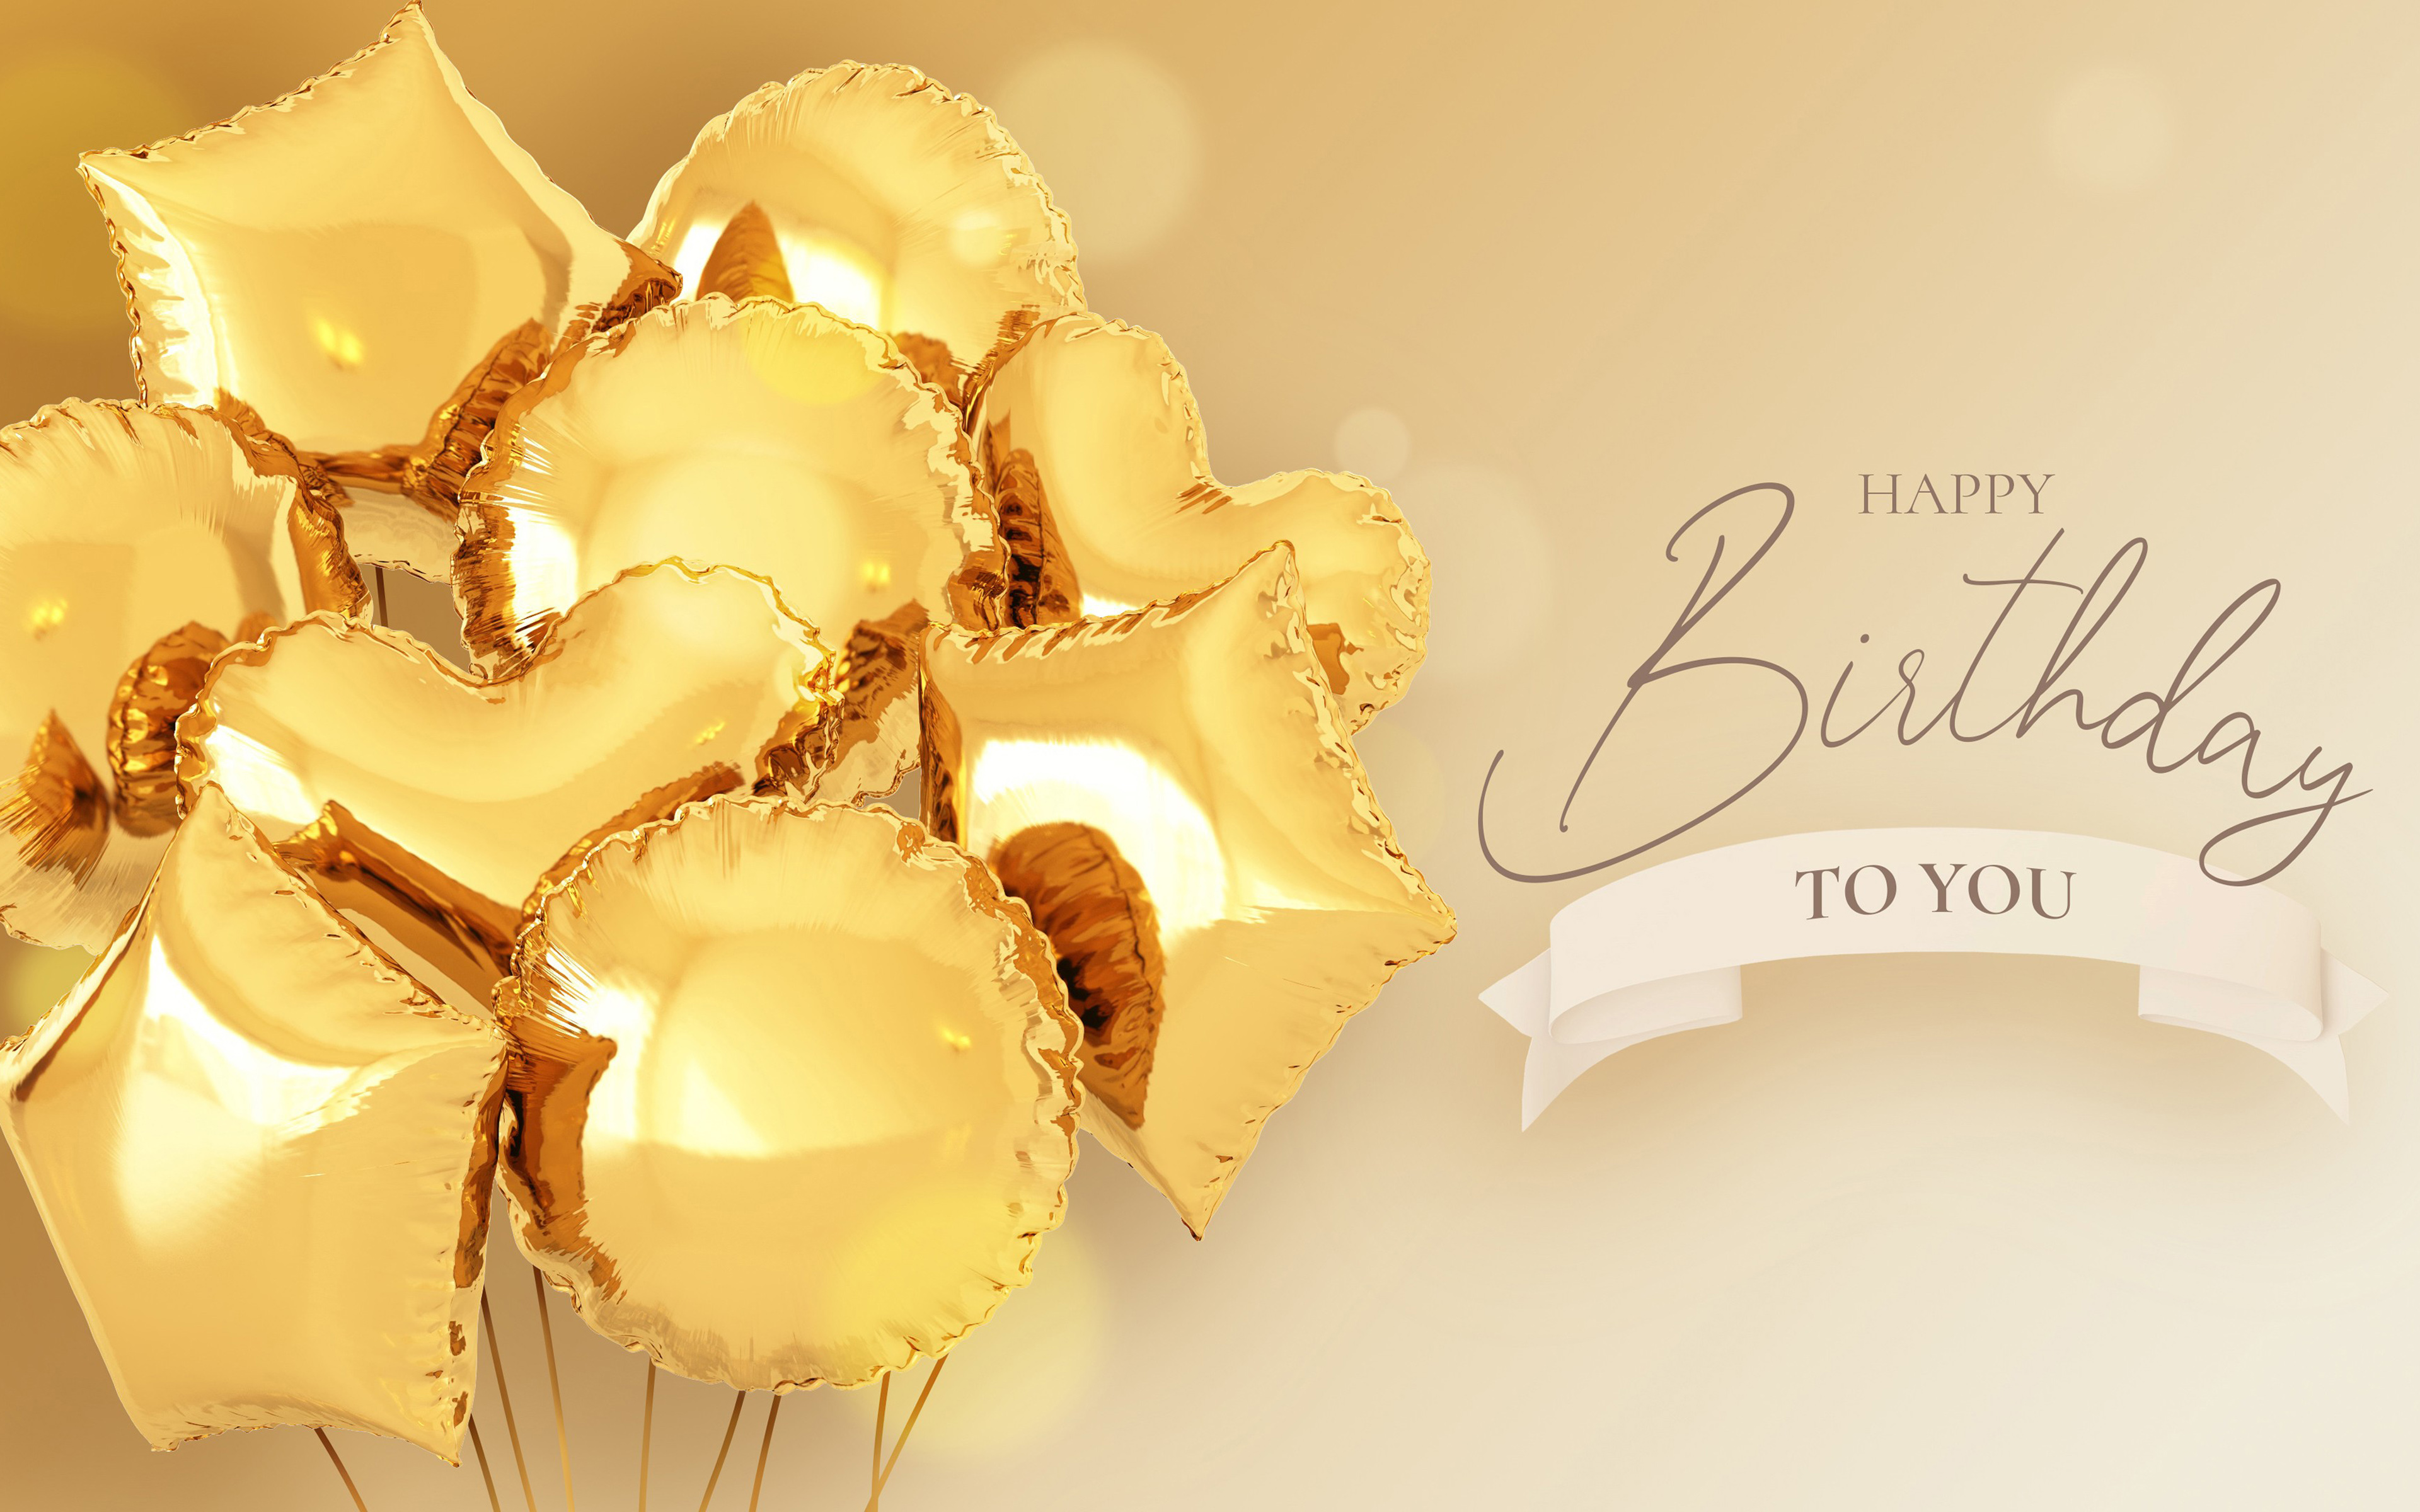 Download wallpaper Happy birthday to you, 4k, yellow birthday background, golden balloons, birthday greeting card, bundle of golden balloons, Happy birthday for desktop with resolution 3840x2400. High Quality HD picture wallpaper